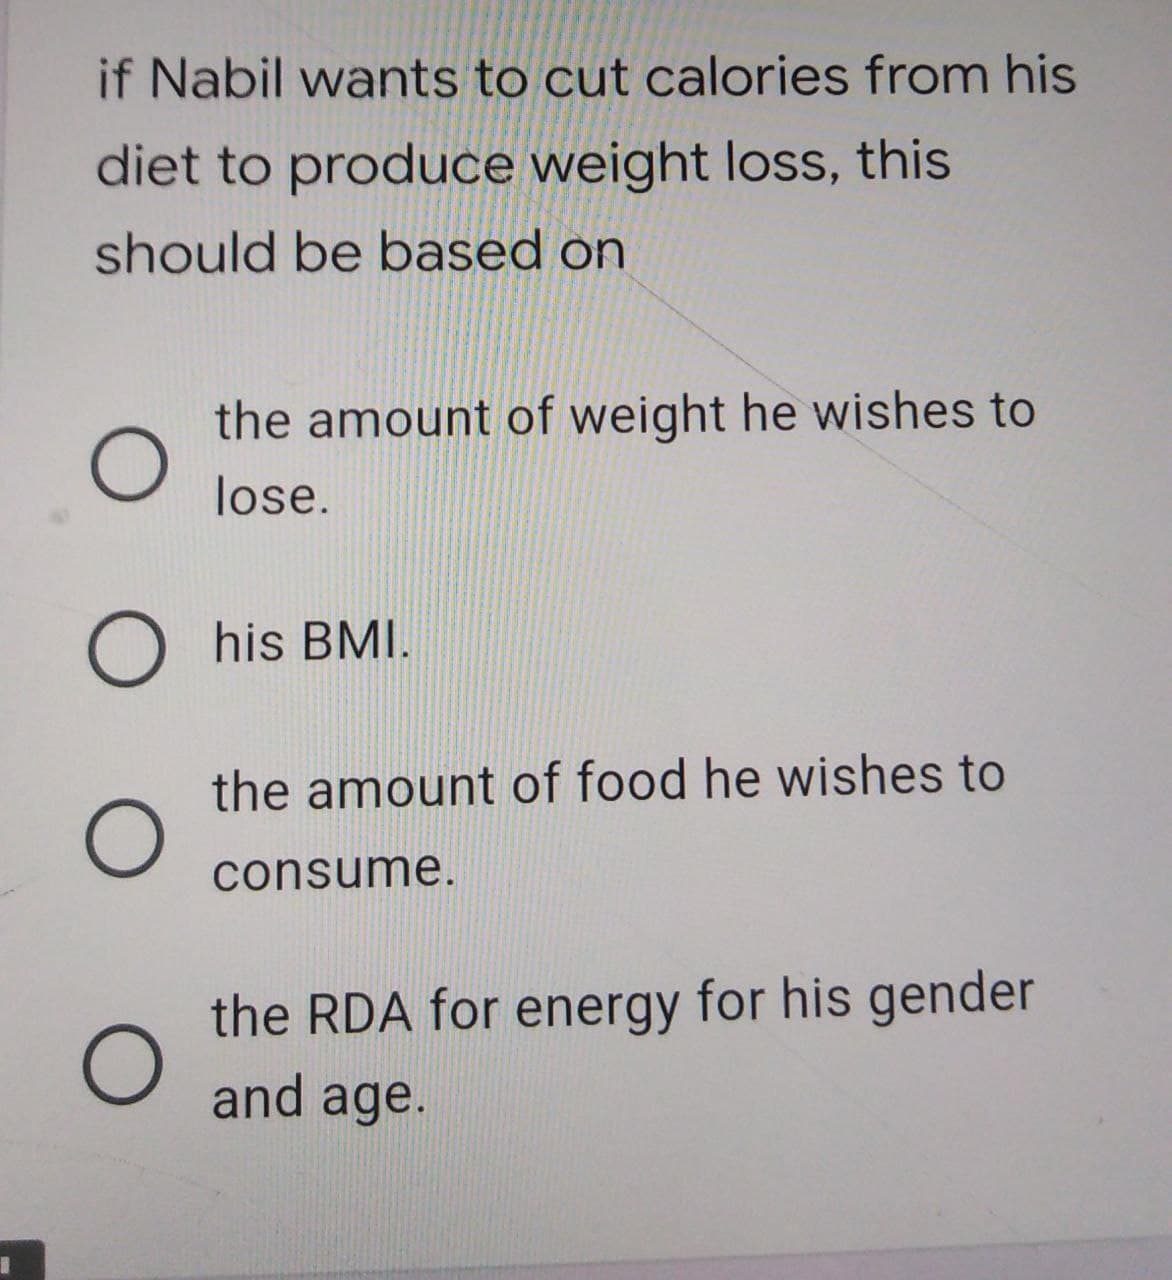 if Nabil wants to cut calories from his
diet to produce weight loss, this
should be based on
the amount of weight he wishes to
lose.
his BMI.
the amount of food he wishes to
consume.
the RDA for energy for his gender
and age.
